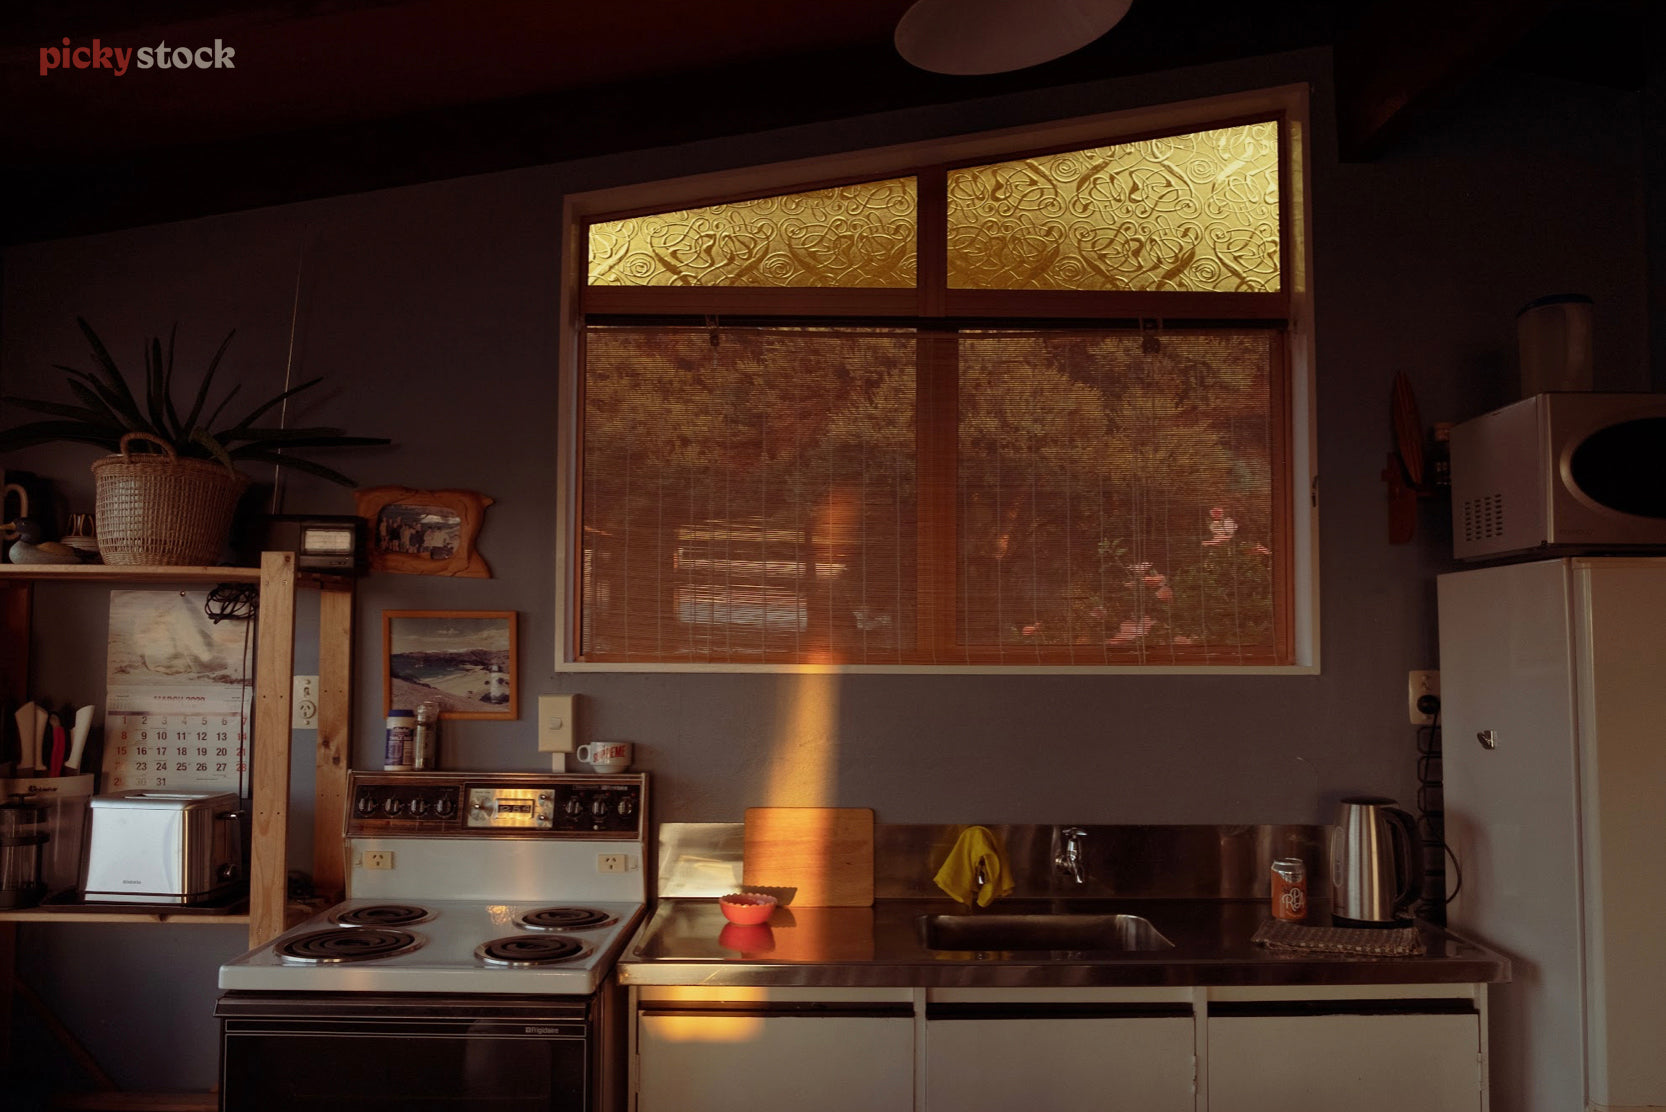 Landscape of a sun-cloaked kitchen in a mid-century style with some modern appliances spread throughout. A single slanted window casts beams of angled light over the countertop.